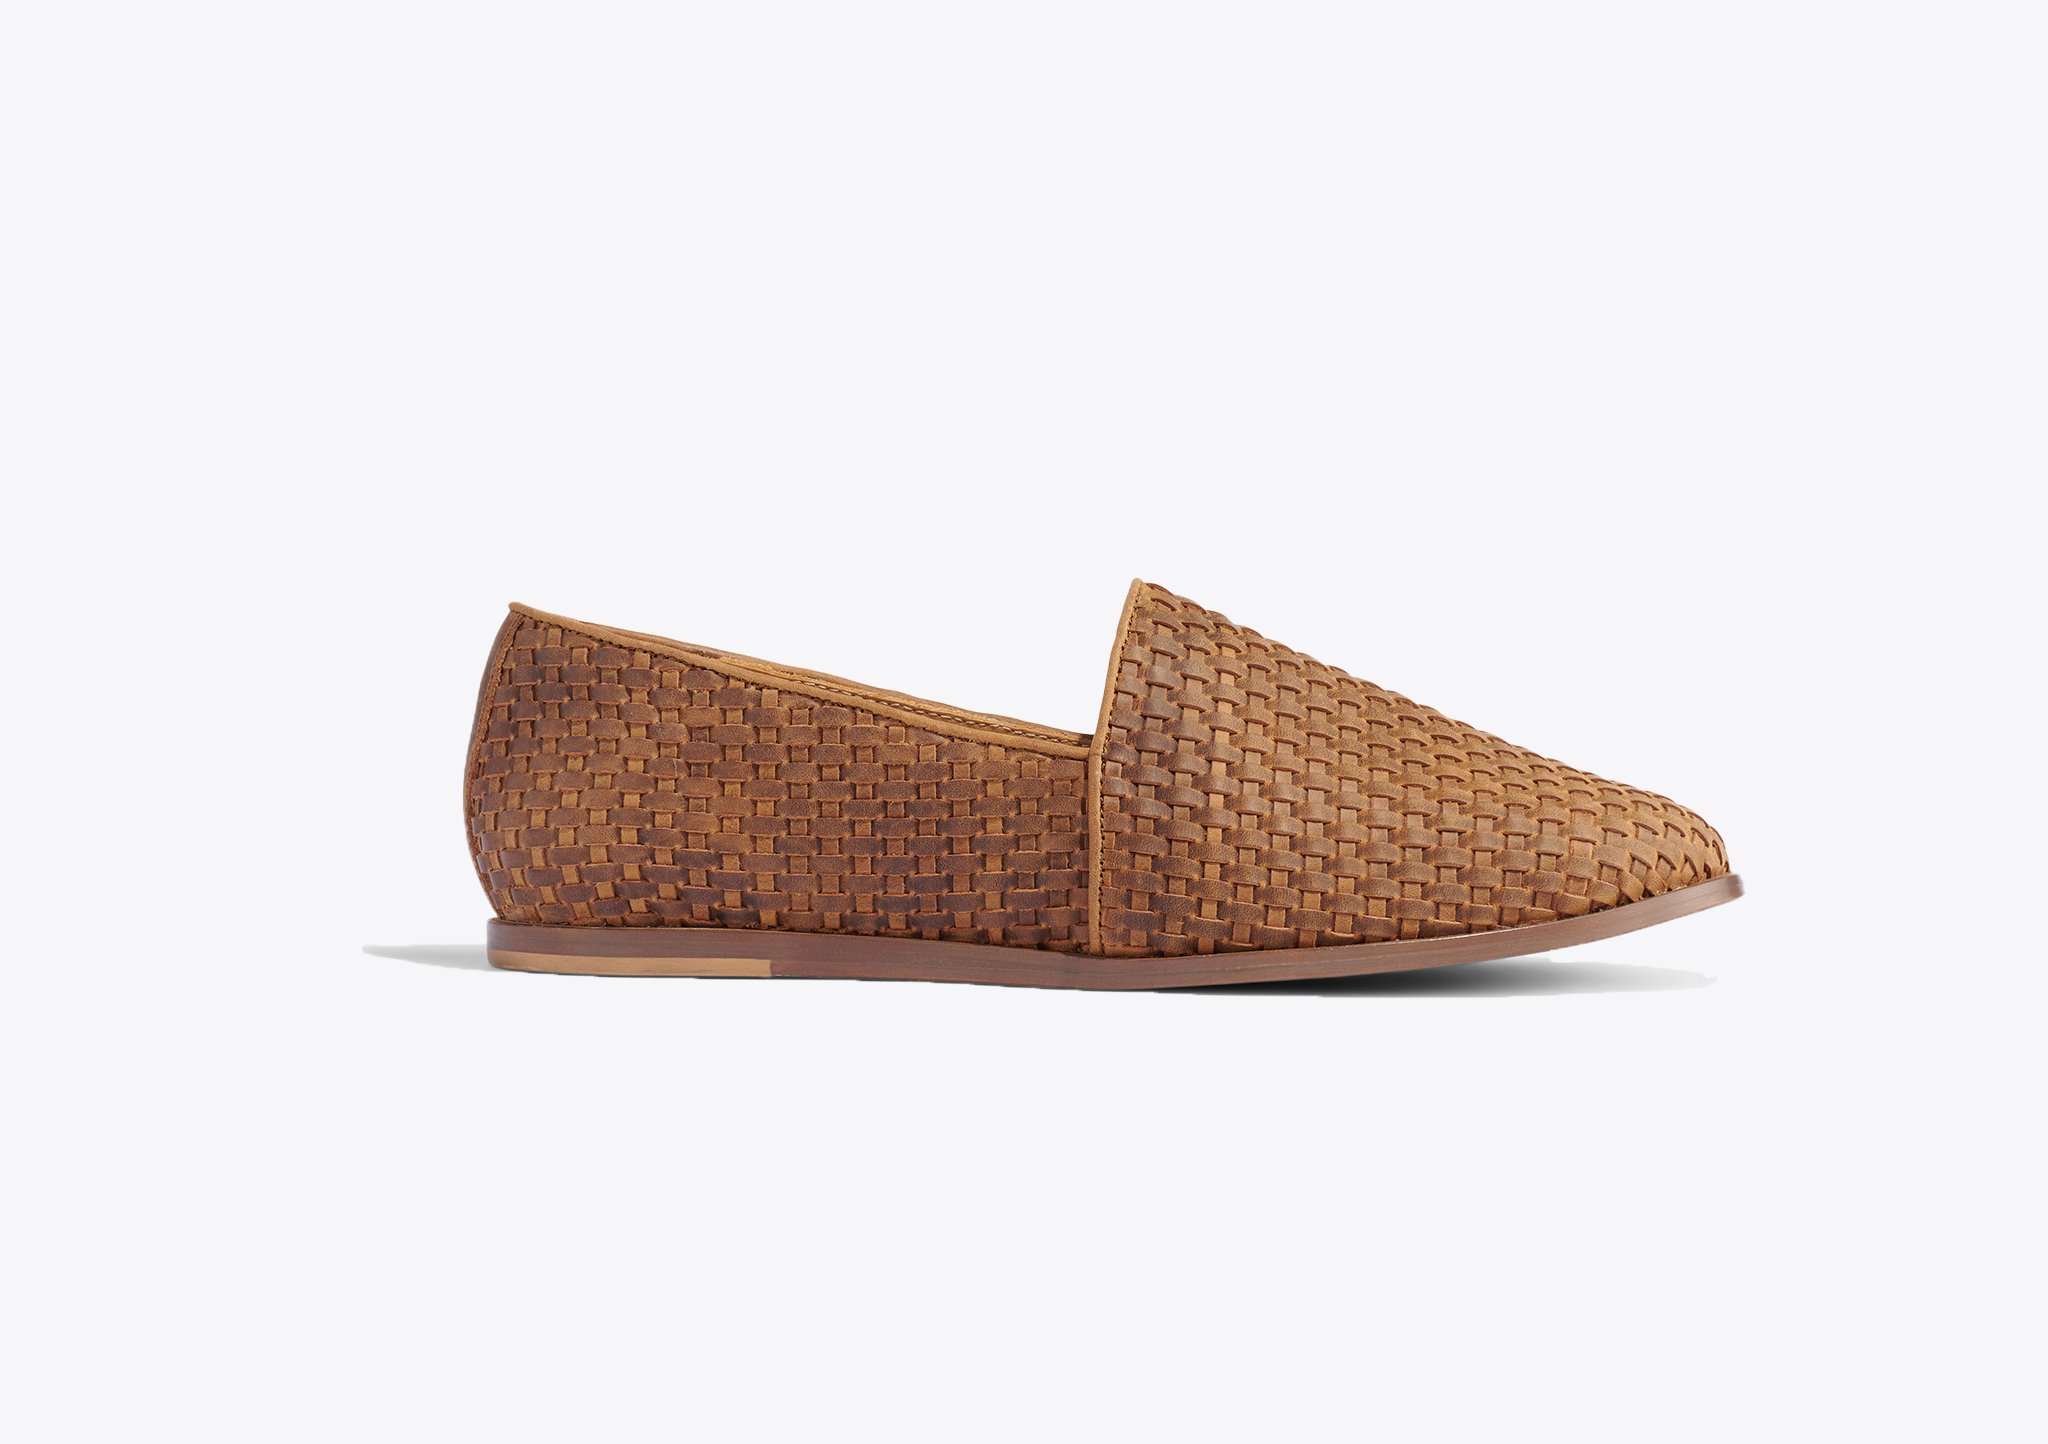 Nisolo Alejandro Woven Slip-On 2.0 Woven Tobacco - Every Nisolo product is built on the foundation of comfort, function, and design. 